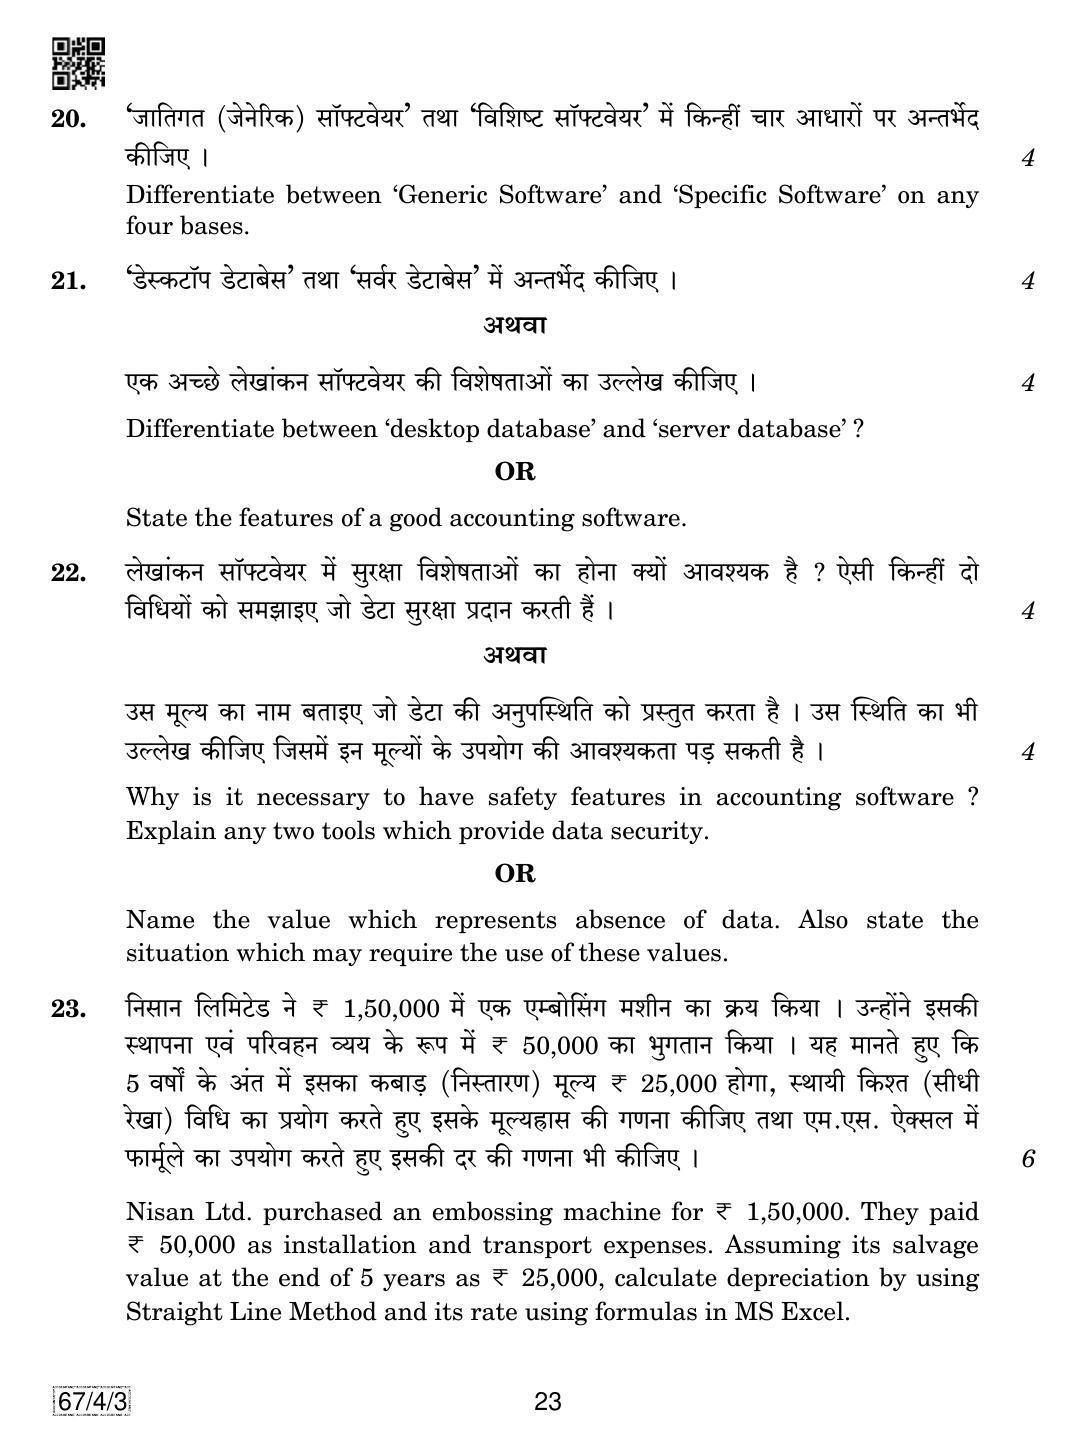 CBSE Class 12 67-4-3 Accountancy 2019 Question Paper - Page 23